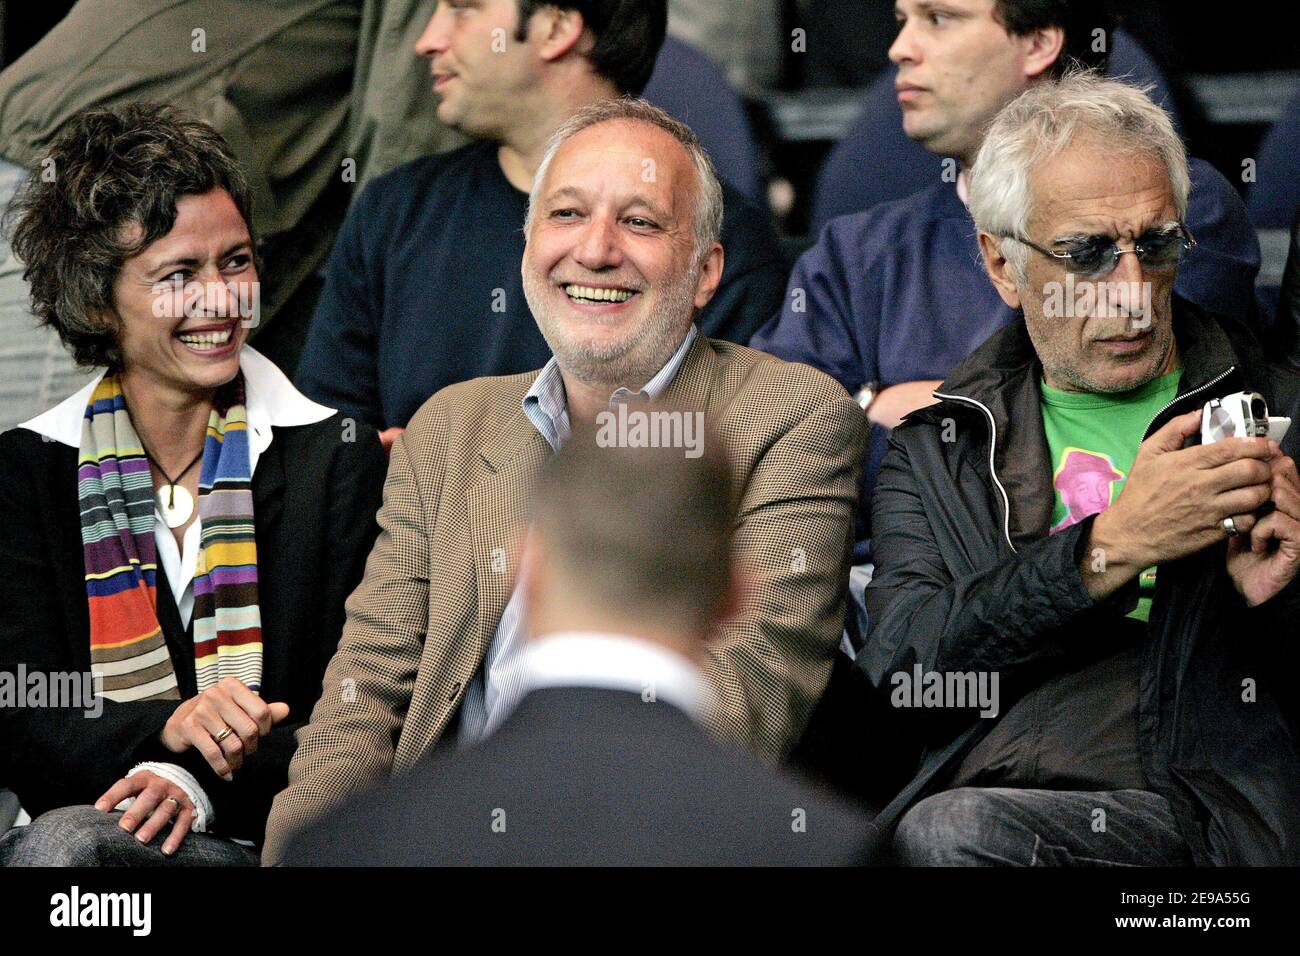 French actor Francois Berleand and Alexia Stresi and Gerard Darmon attend the French first league football match Paris Saint-Germain vs Ajaccio at the Parc des Princes in Paris, France, on May 6, 2006. Ajaccio won 4-2. Photo by Laurent Zabulon/ABACAPRESS.COM Stock Photo